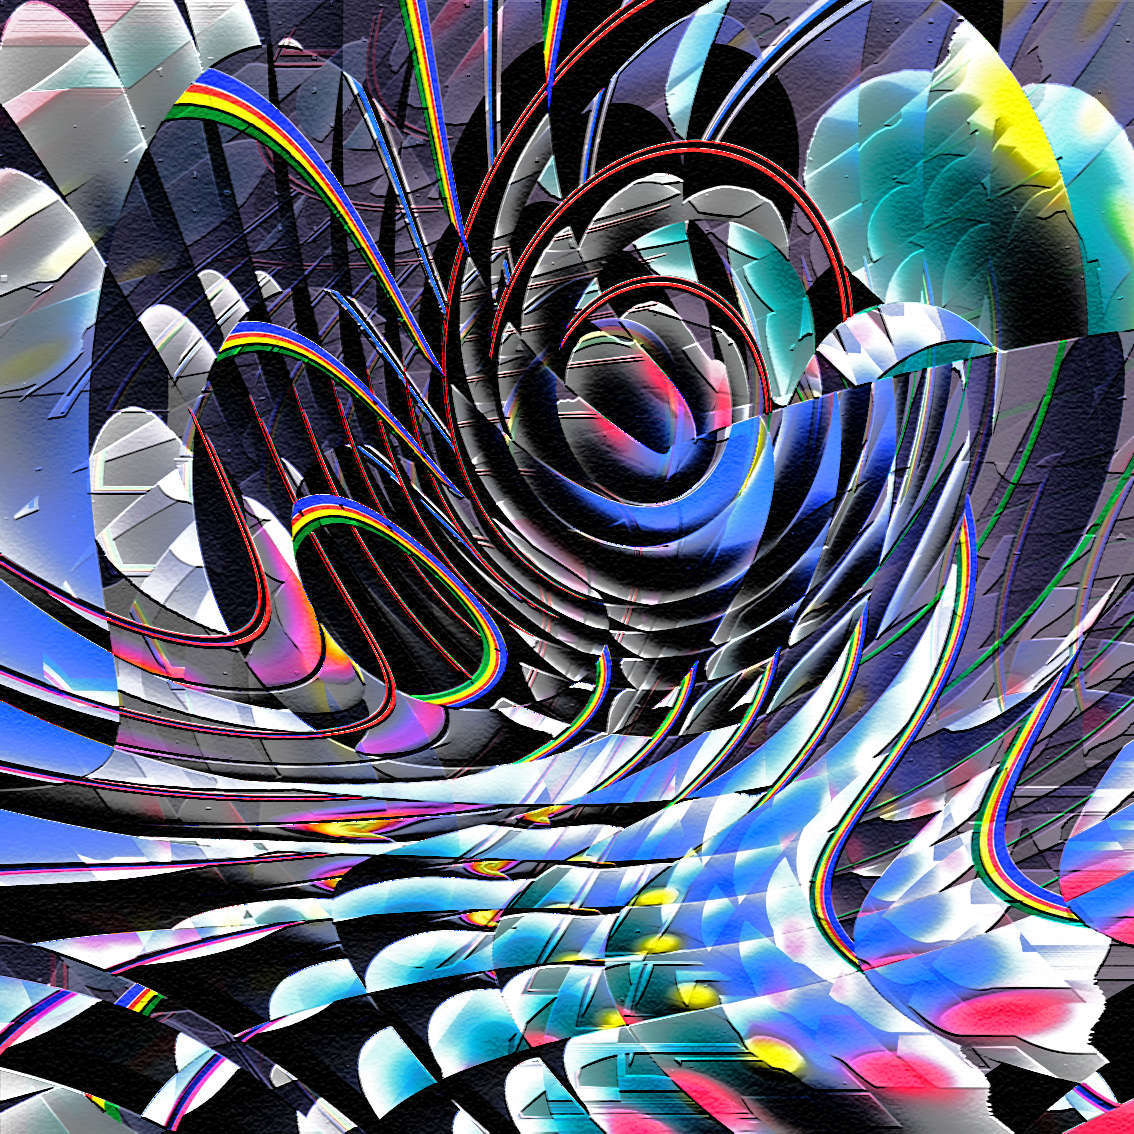 Thron_of_The_Marble_FeatherHead.jpg : Section 3 : American artist digital invention archival artifact color print image emerging capture creative convergent transparency universe dream history painter Hybrid exhibition